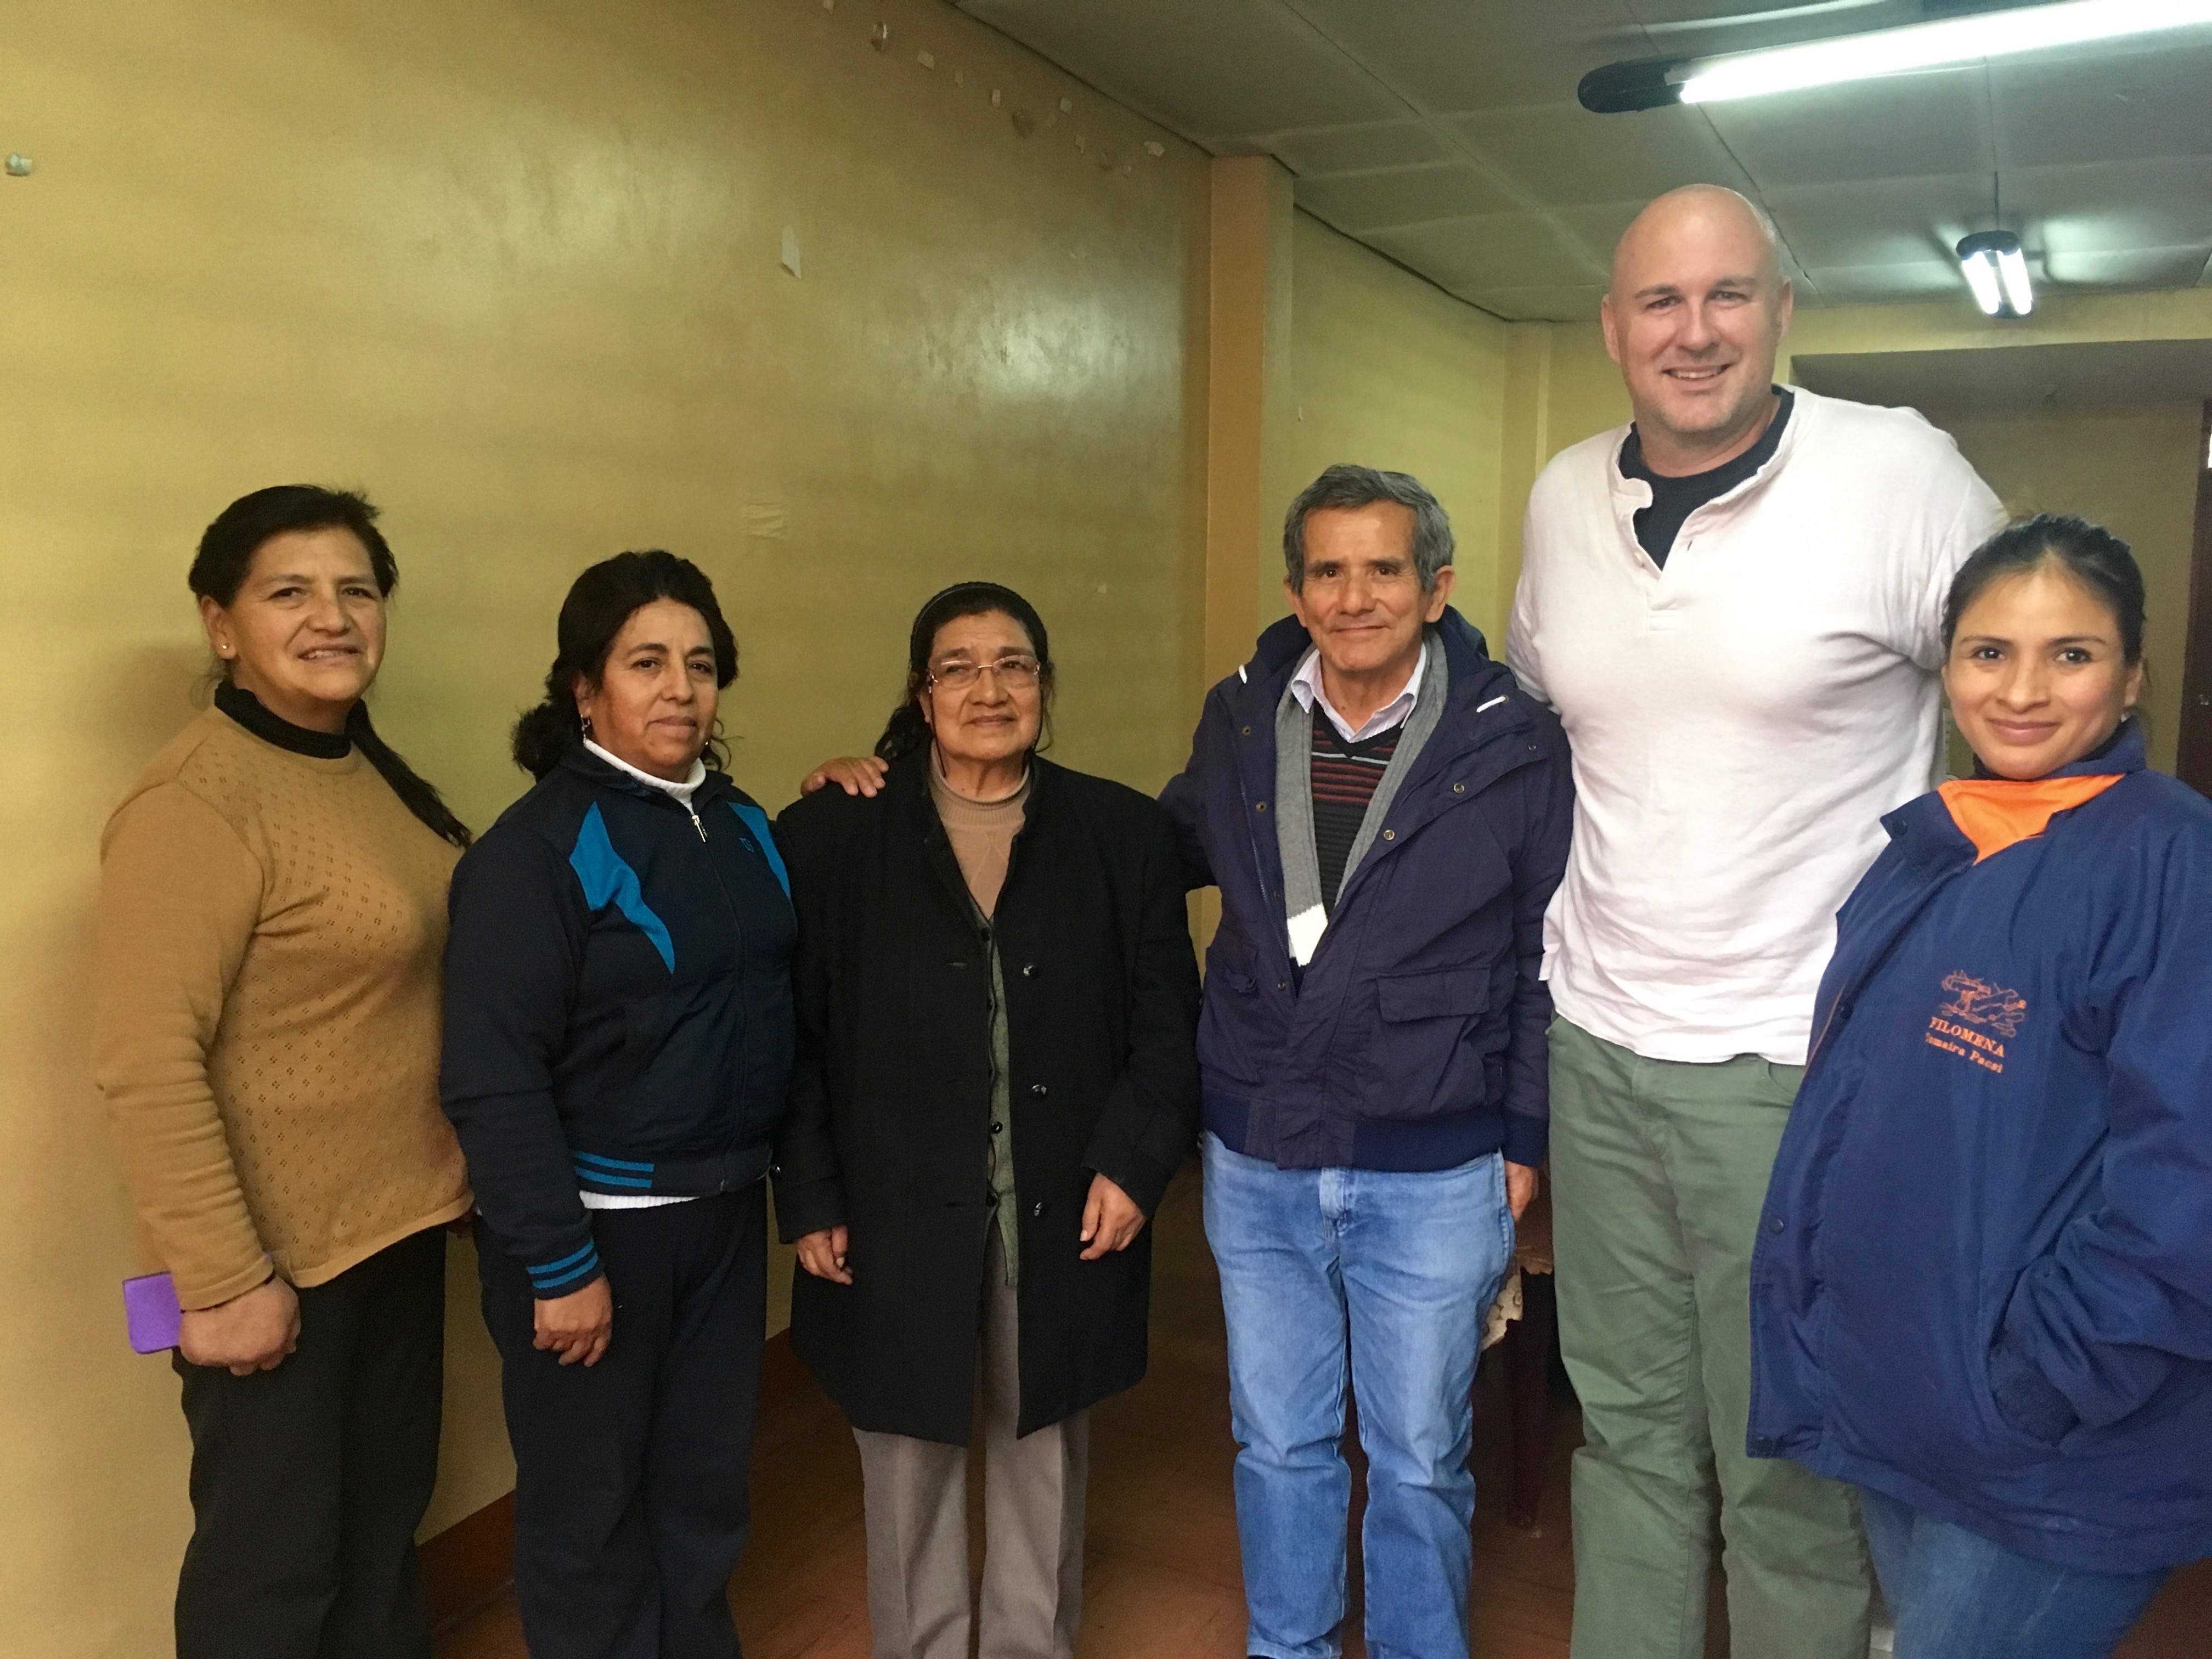 From left to right, partners gather in La Oroya to tell their story with friends and colleagues: Erlinda de la Torre, Yolanda Zurita, Esther Hinostroza, Conrado Olivera (director of the Joining Hands Network in Peru), Jed Koball and Sherley Echevarria (Esther´s daughter). (photo by Cindy Correl)